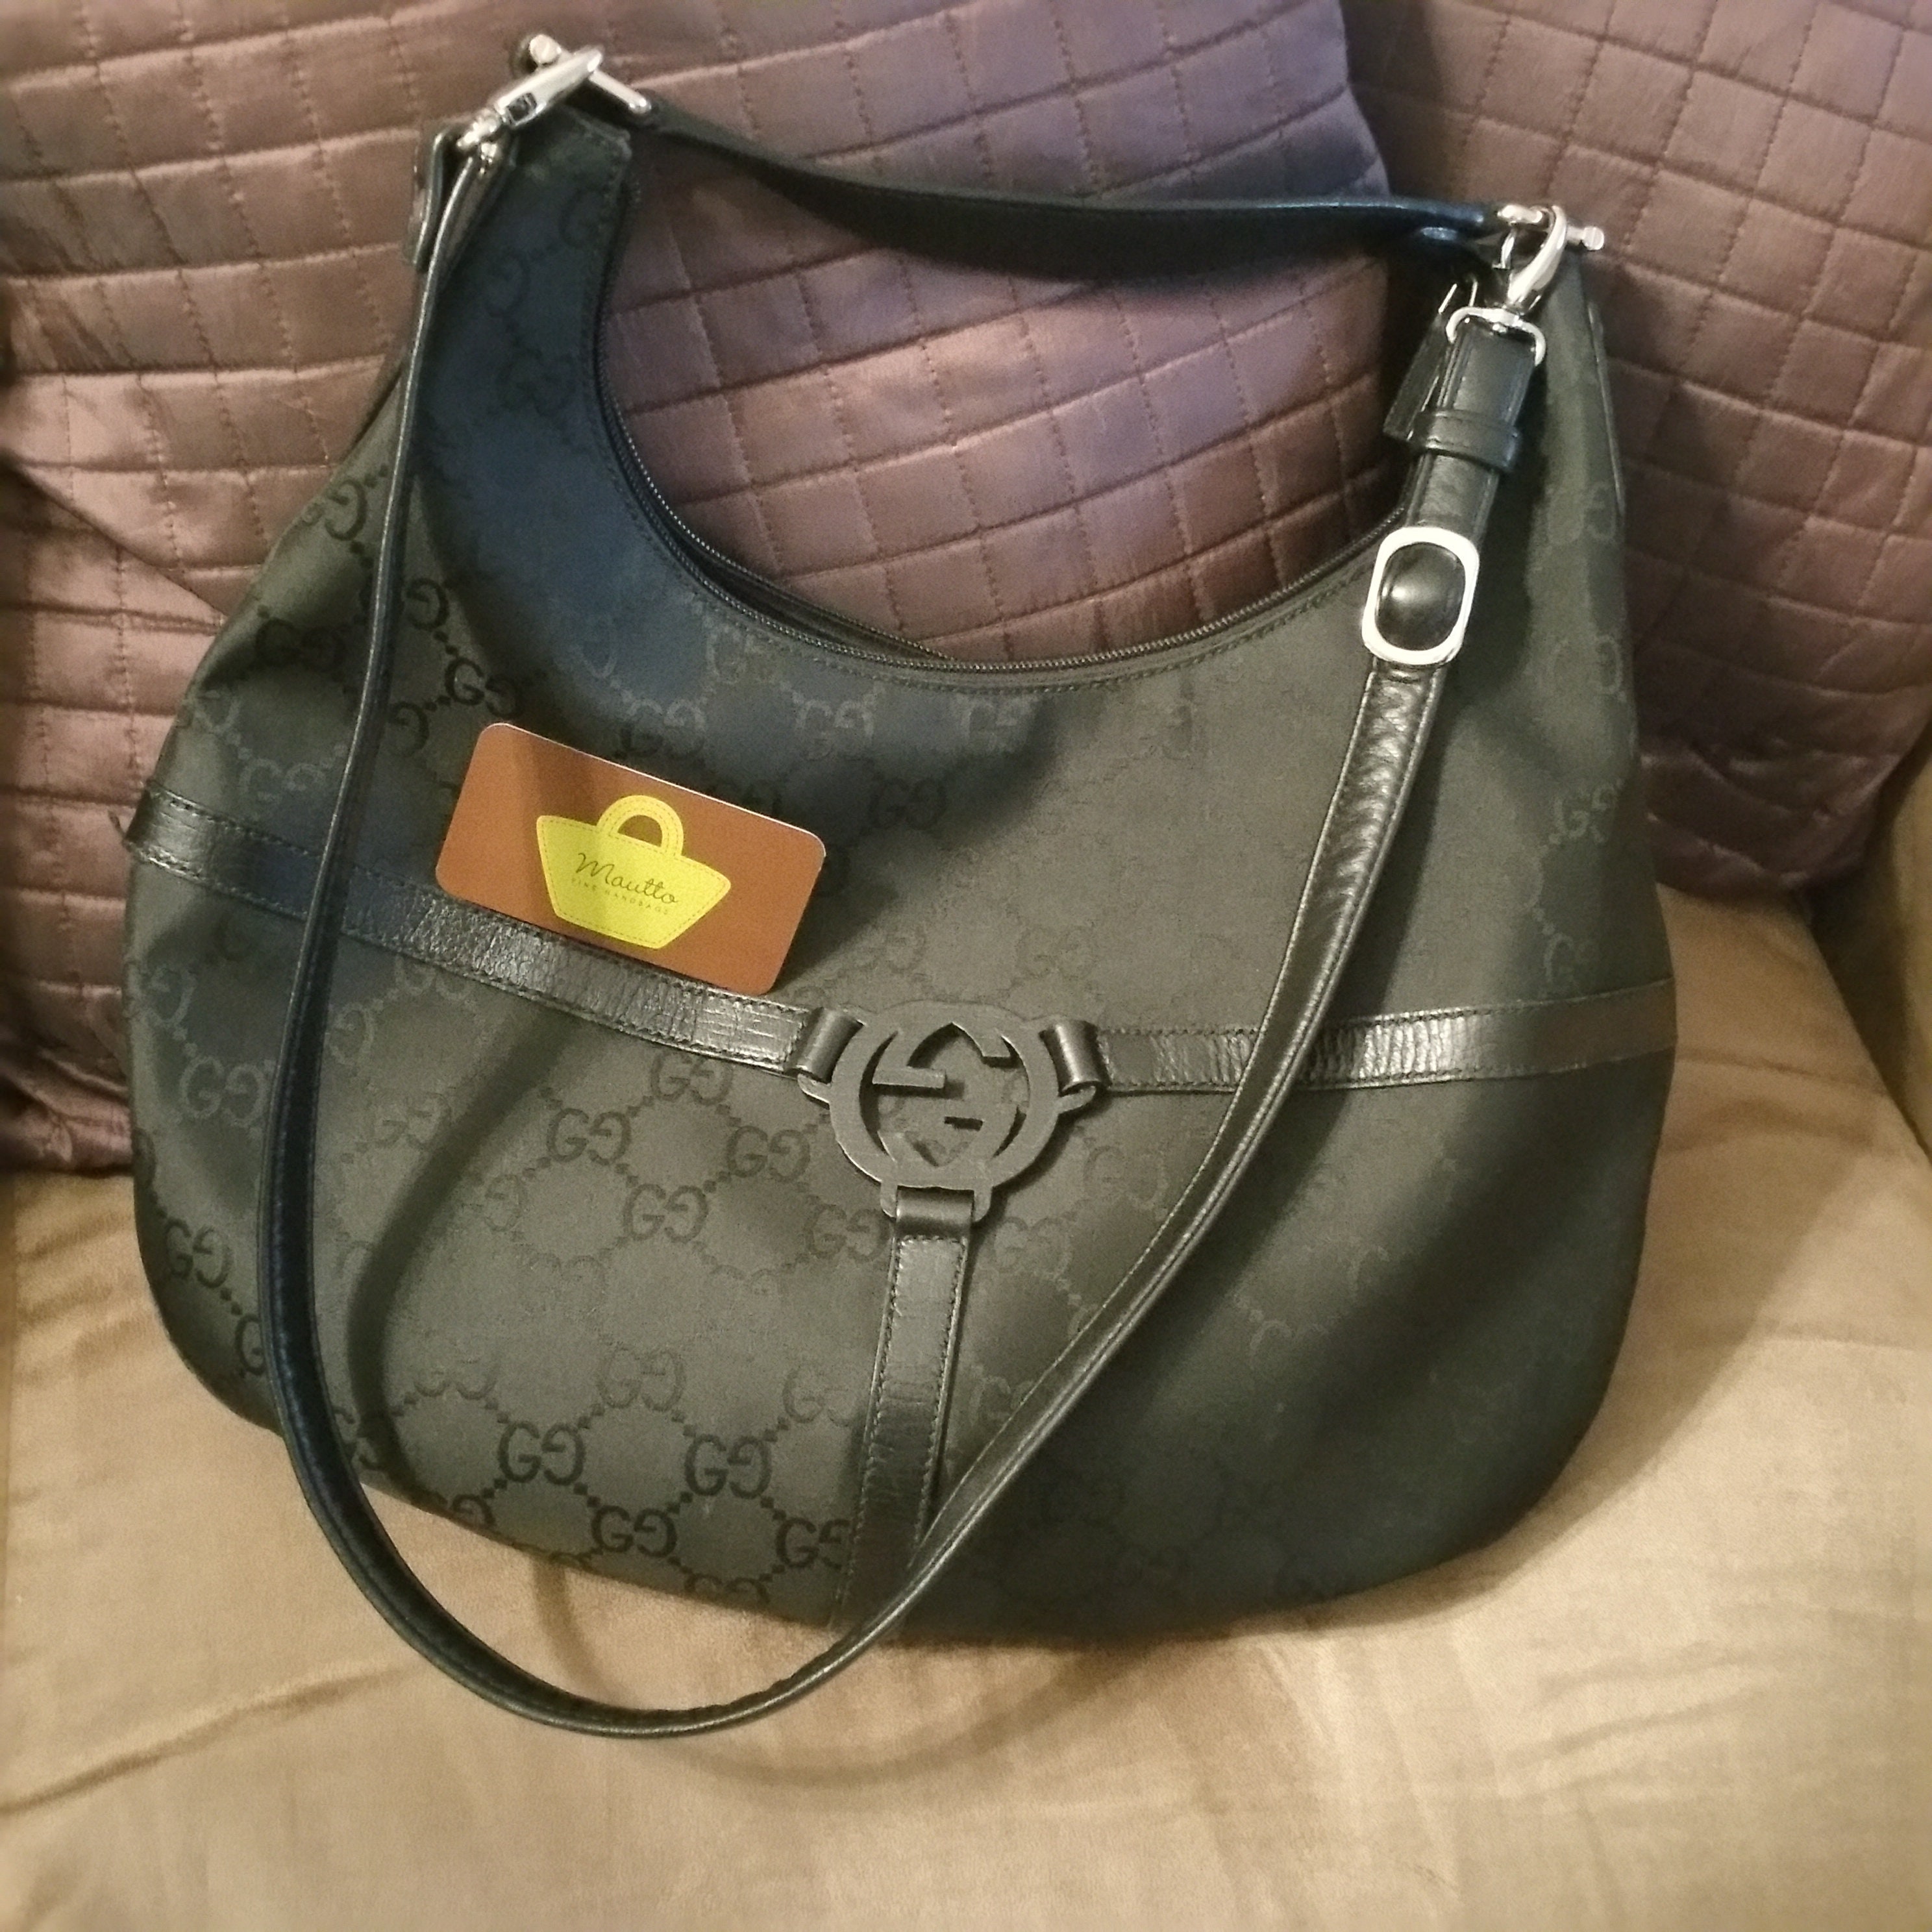 Gucci Navy Blue Vintage GG Canvas Tote at Jill's Consignment